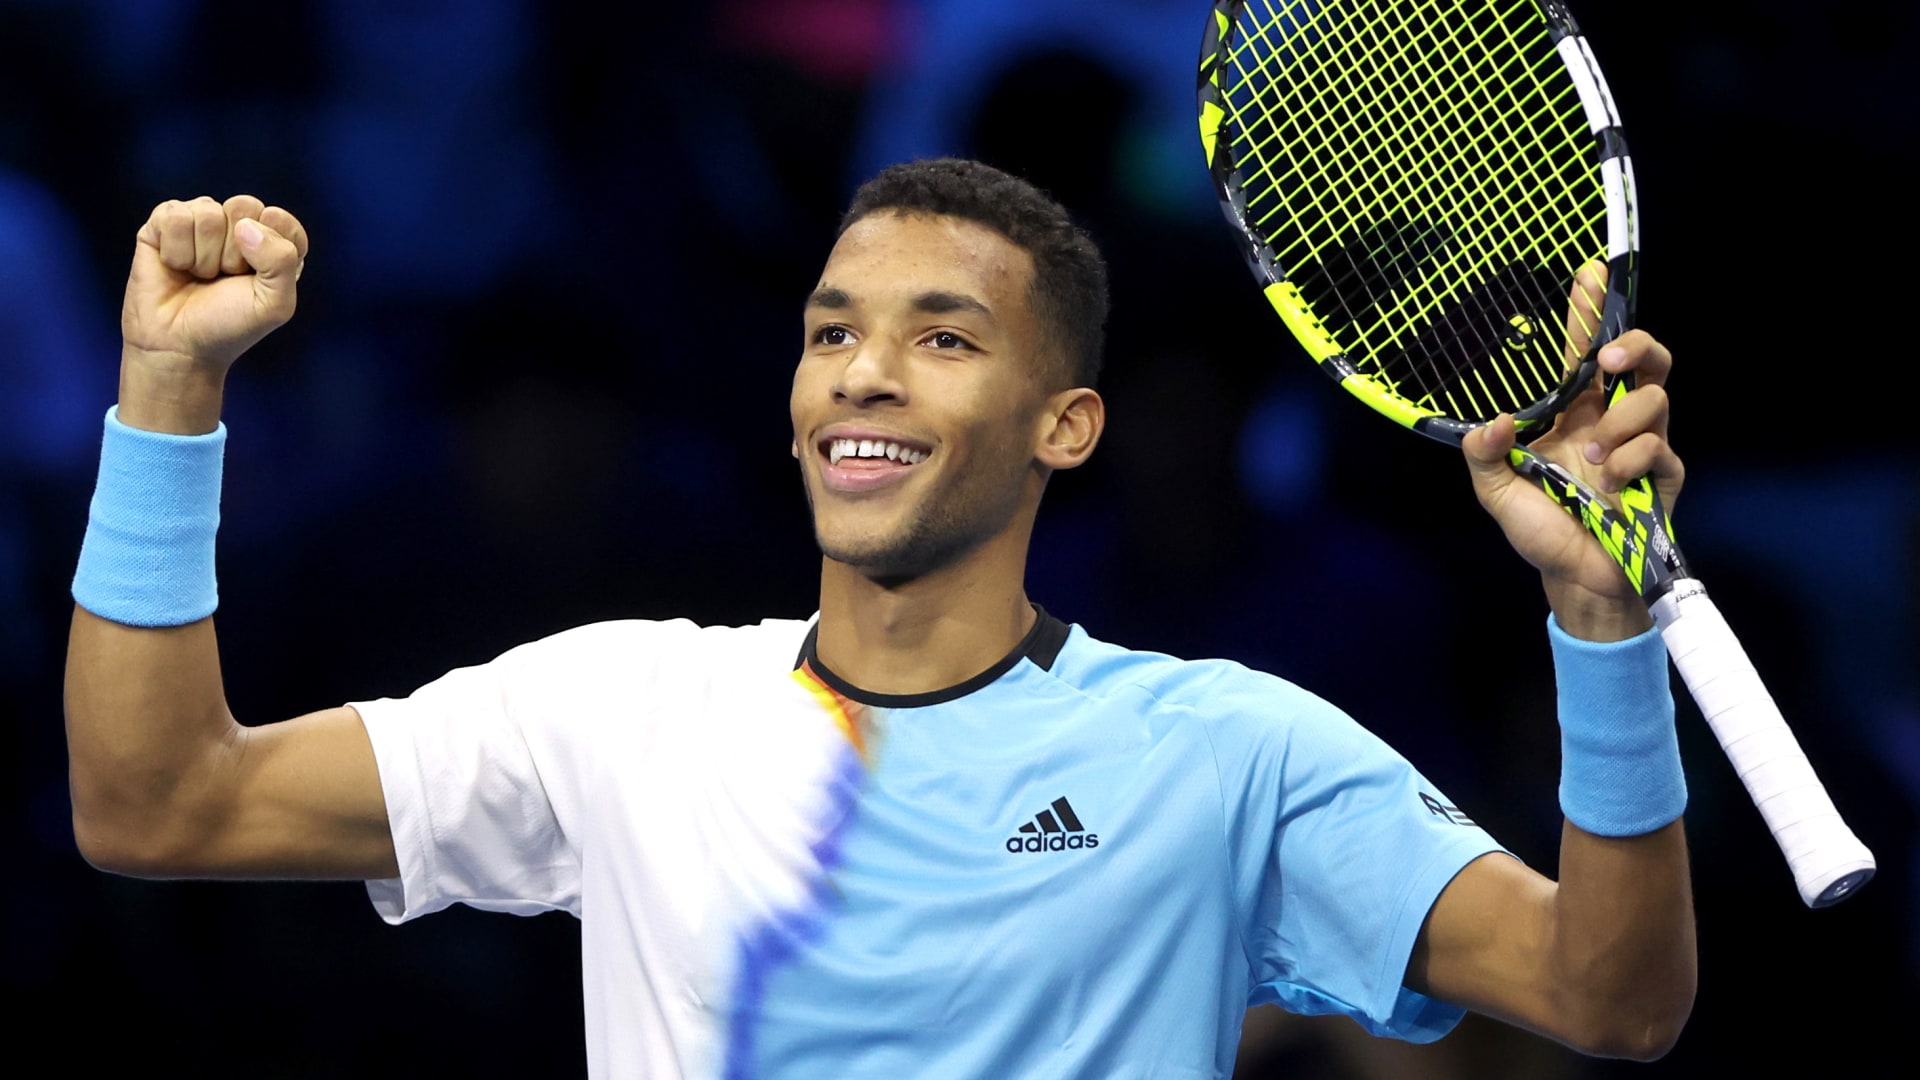 Stat of the Day Felix Auger-Aliassime becomes first player born in 2000s to beat Federer, Djokovic AND Nadal